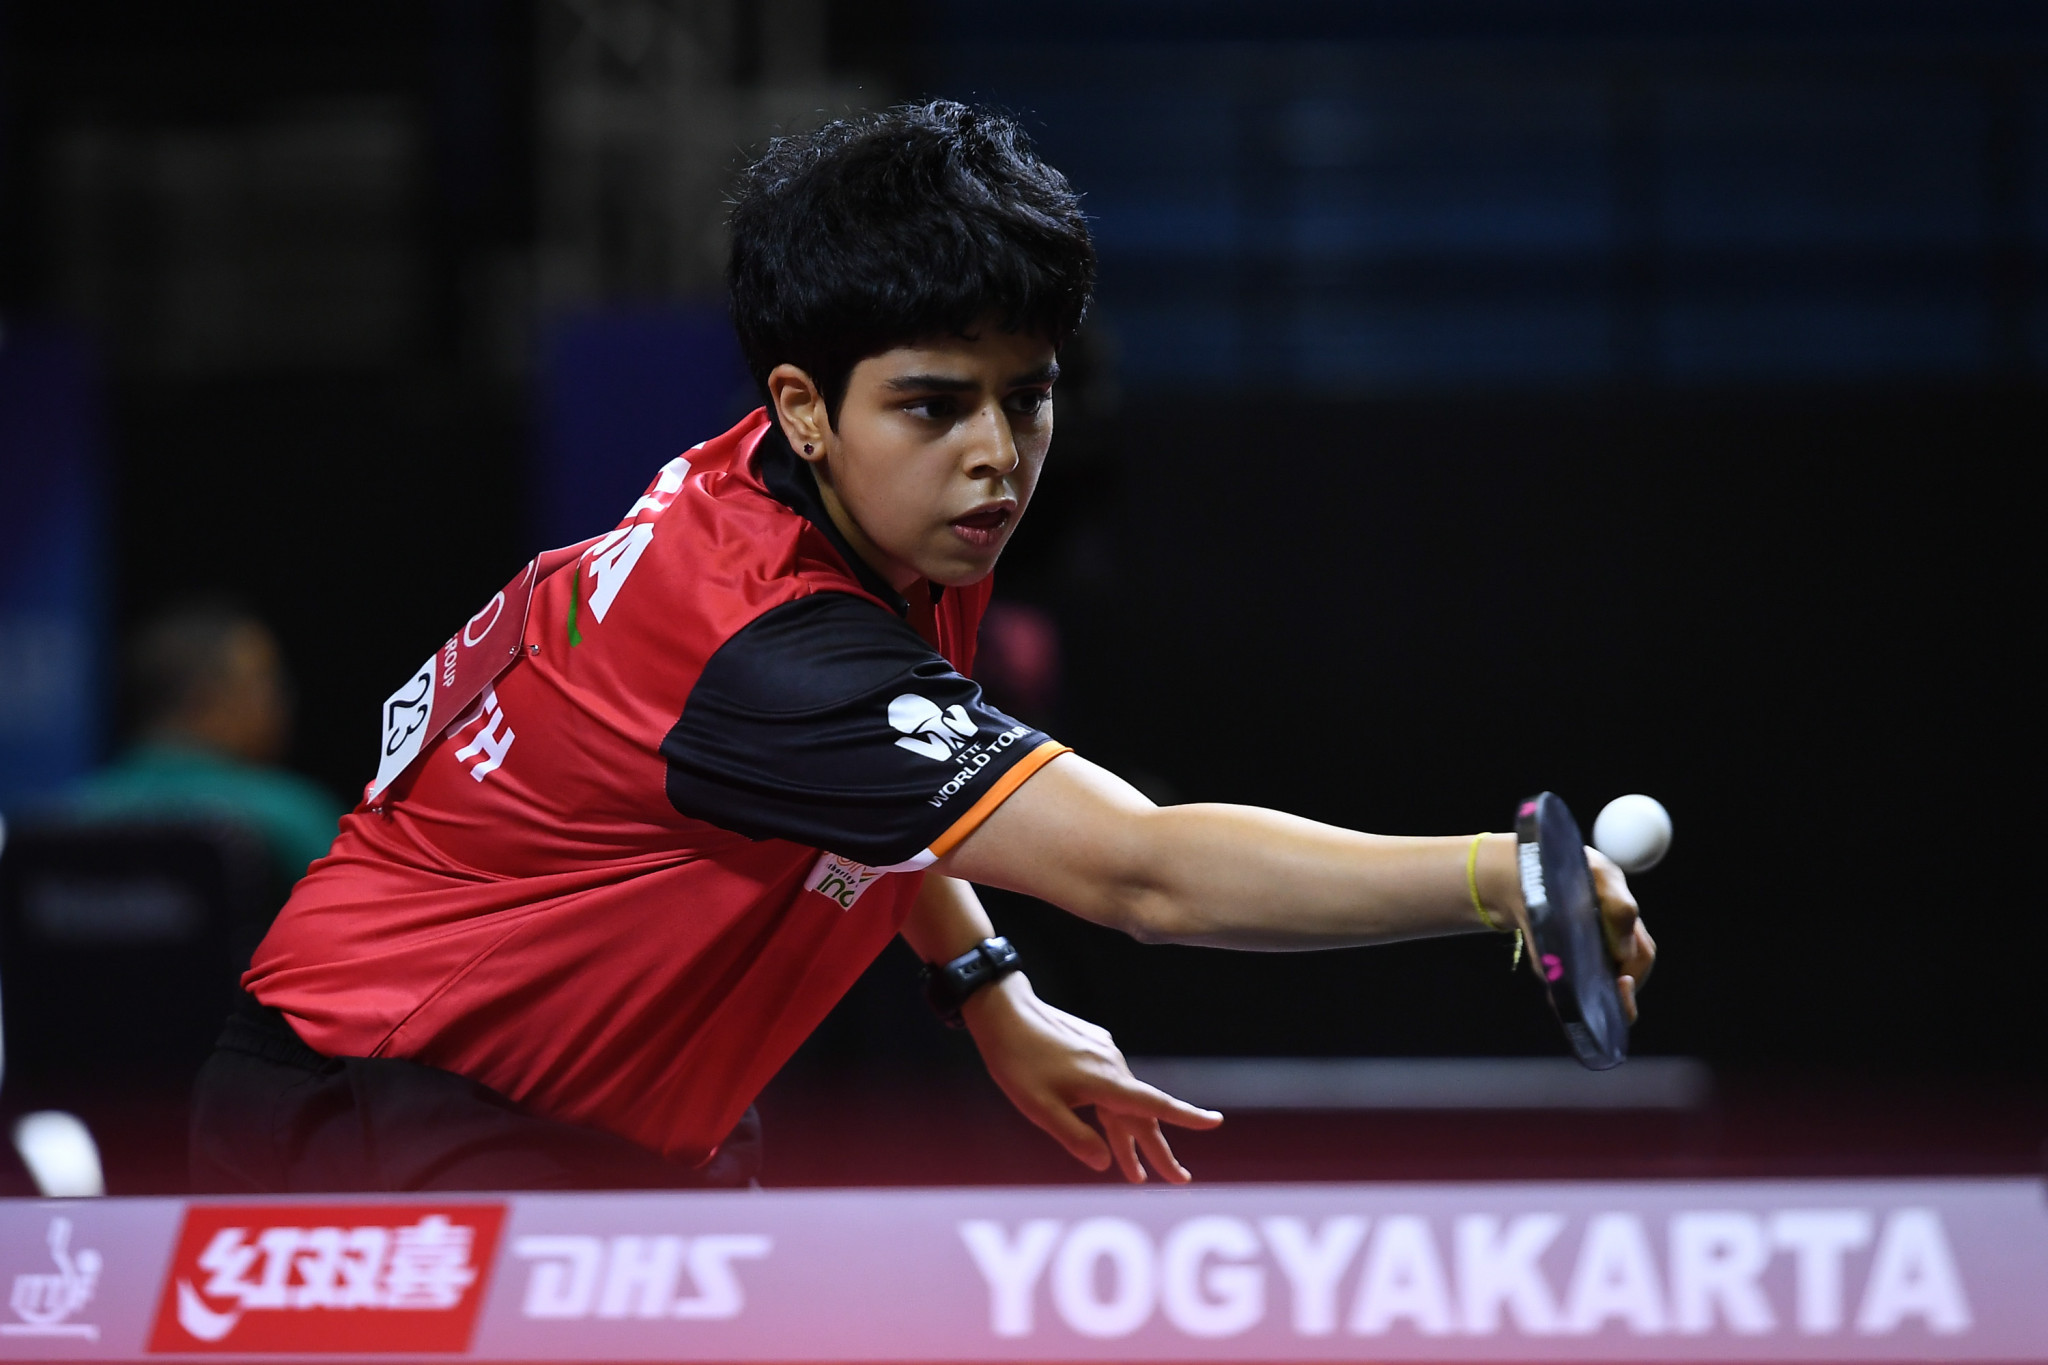 The High Court of Karnataka ordered the Table Tennis Federation of India to withhold its women's team selection announcement for Birmingham 2022 after an appeal from Archana Girish Kamath ©Getty Images